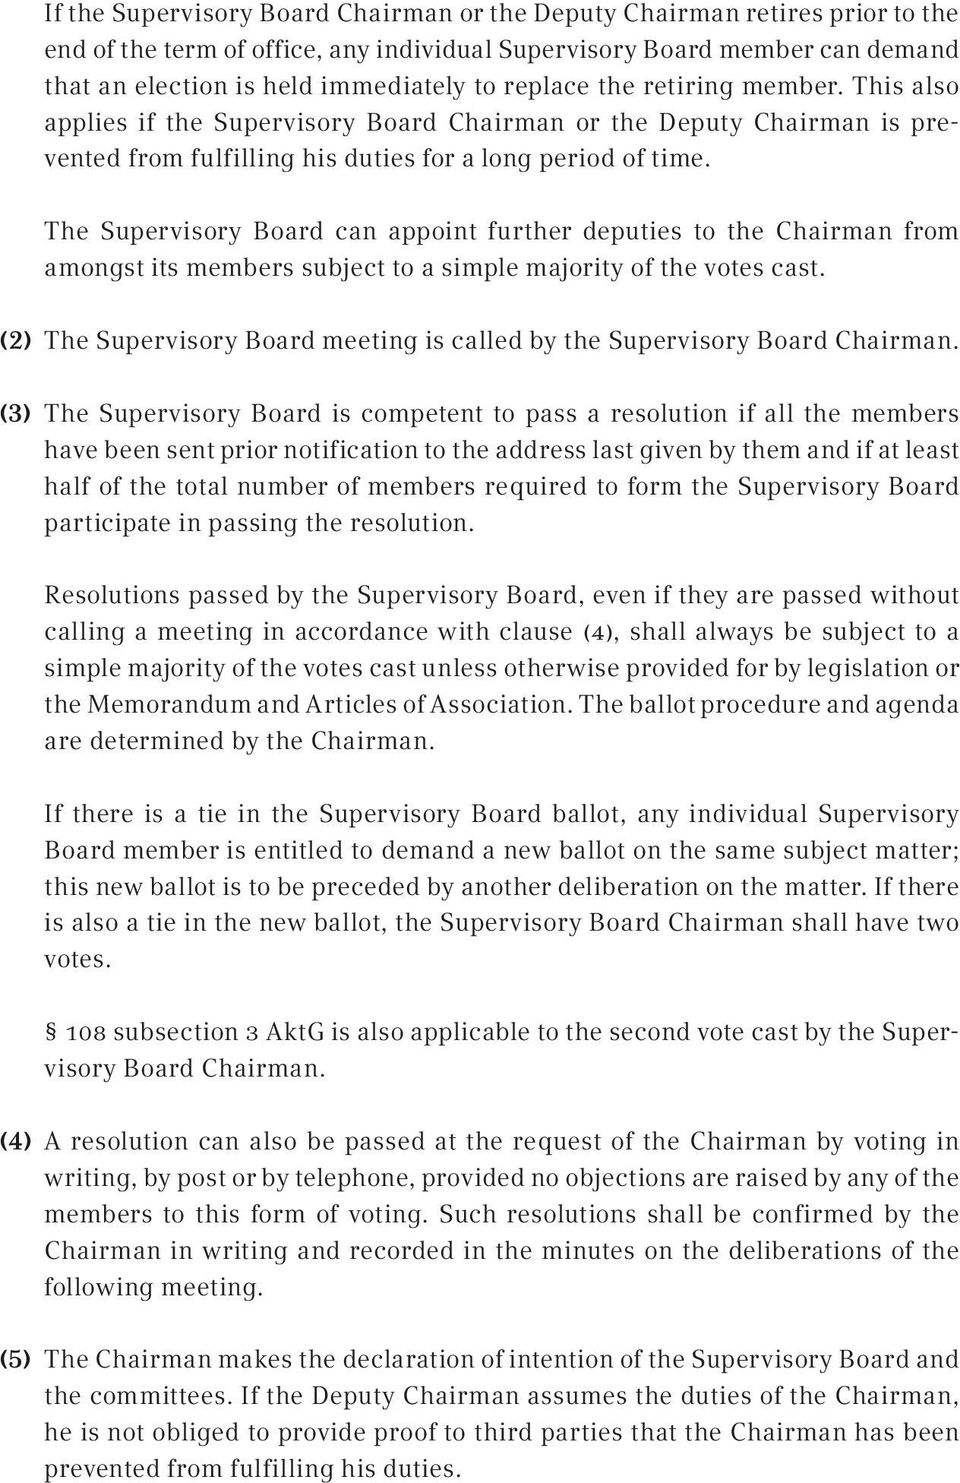 The Supervisory Board can appoint further deputies to the Chairman from amongst its members subject to a simple majority of the votes cast.